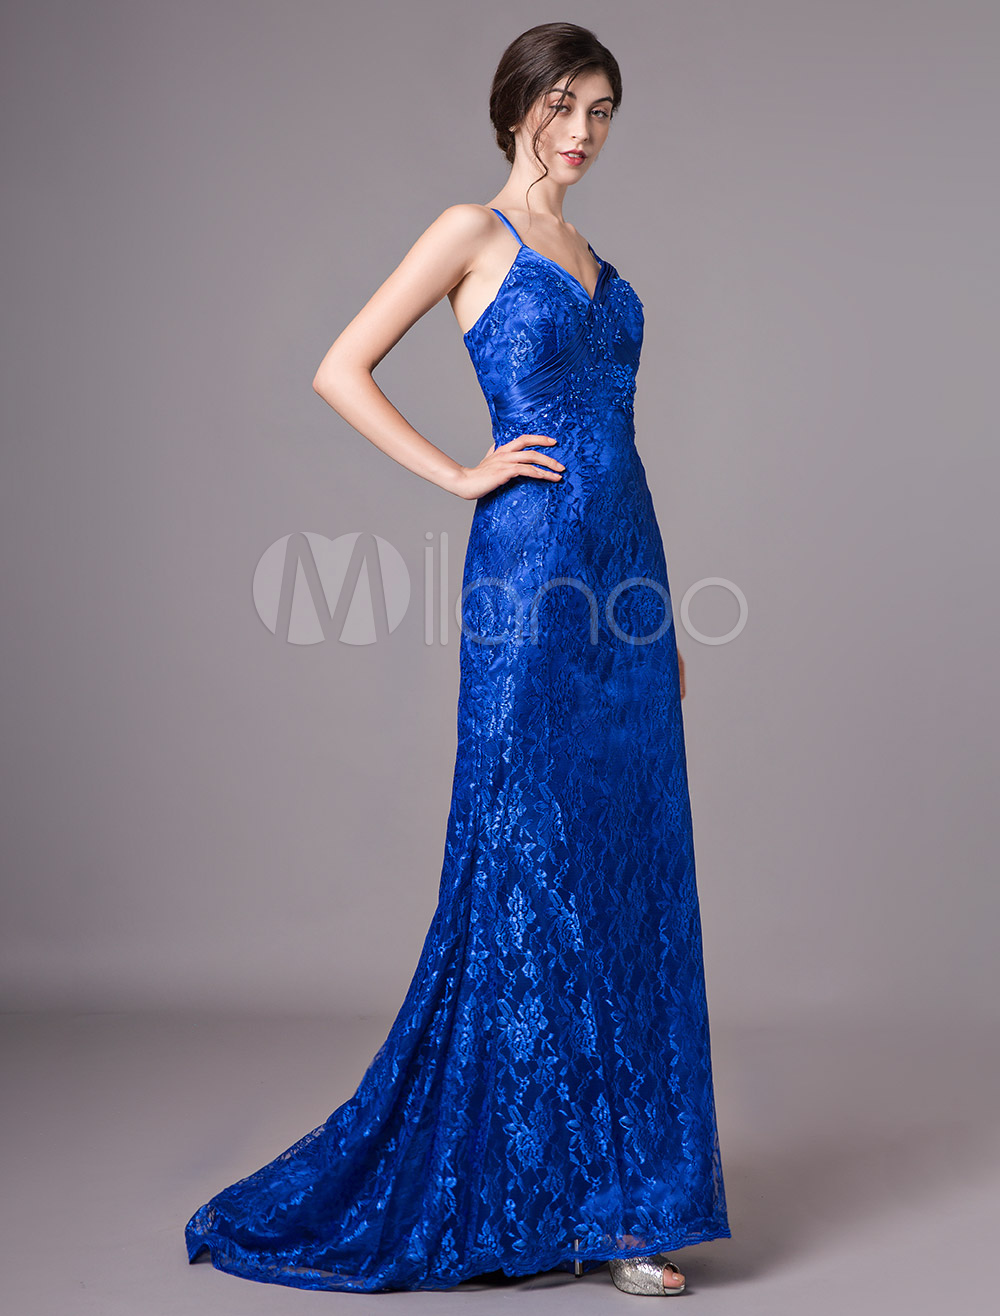 Mother Of The Bride Outfit Dress And Jacket Royal Blue Lace Sheath Long ...